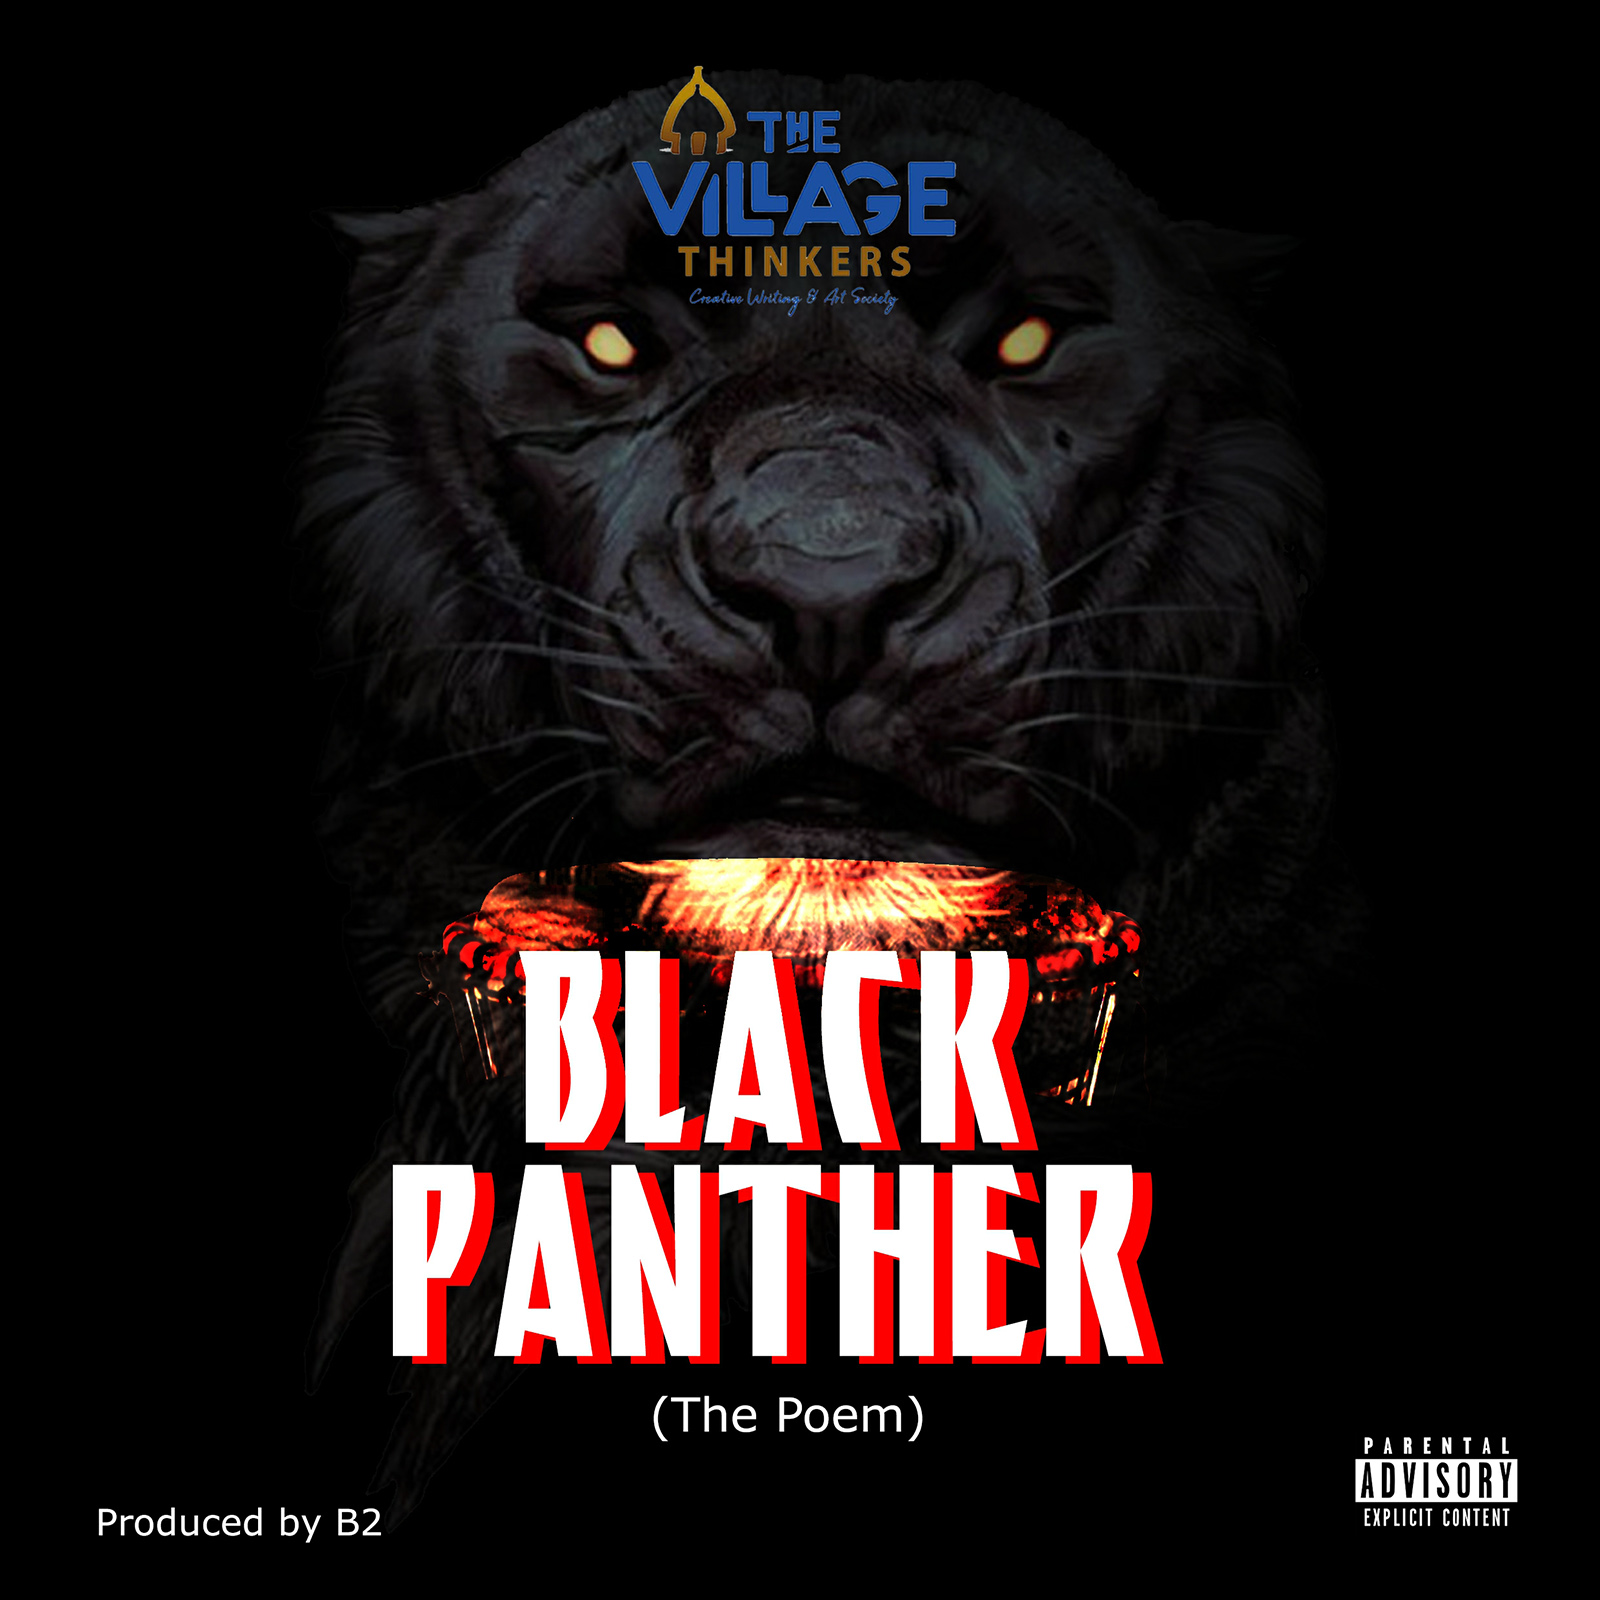 Black Panther (Spoken Word) by The Village Thinkers